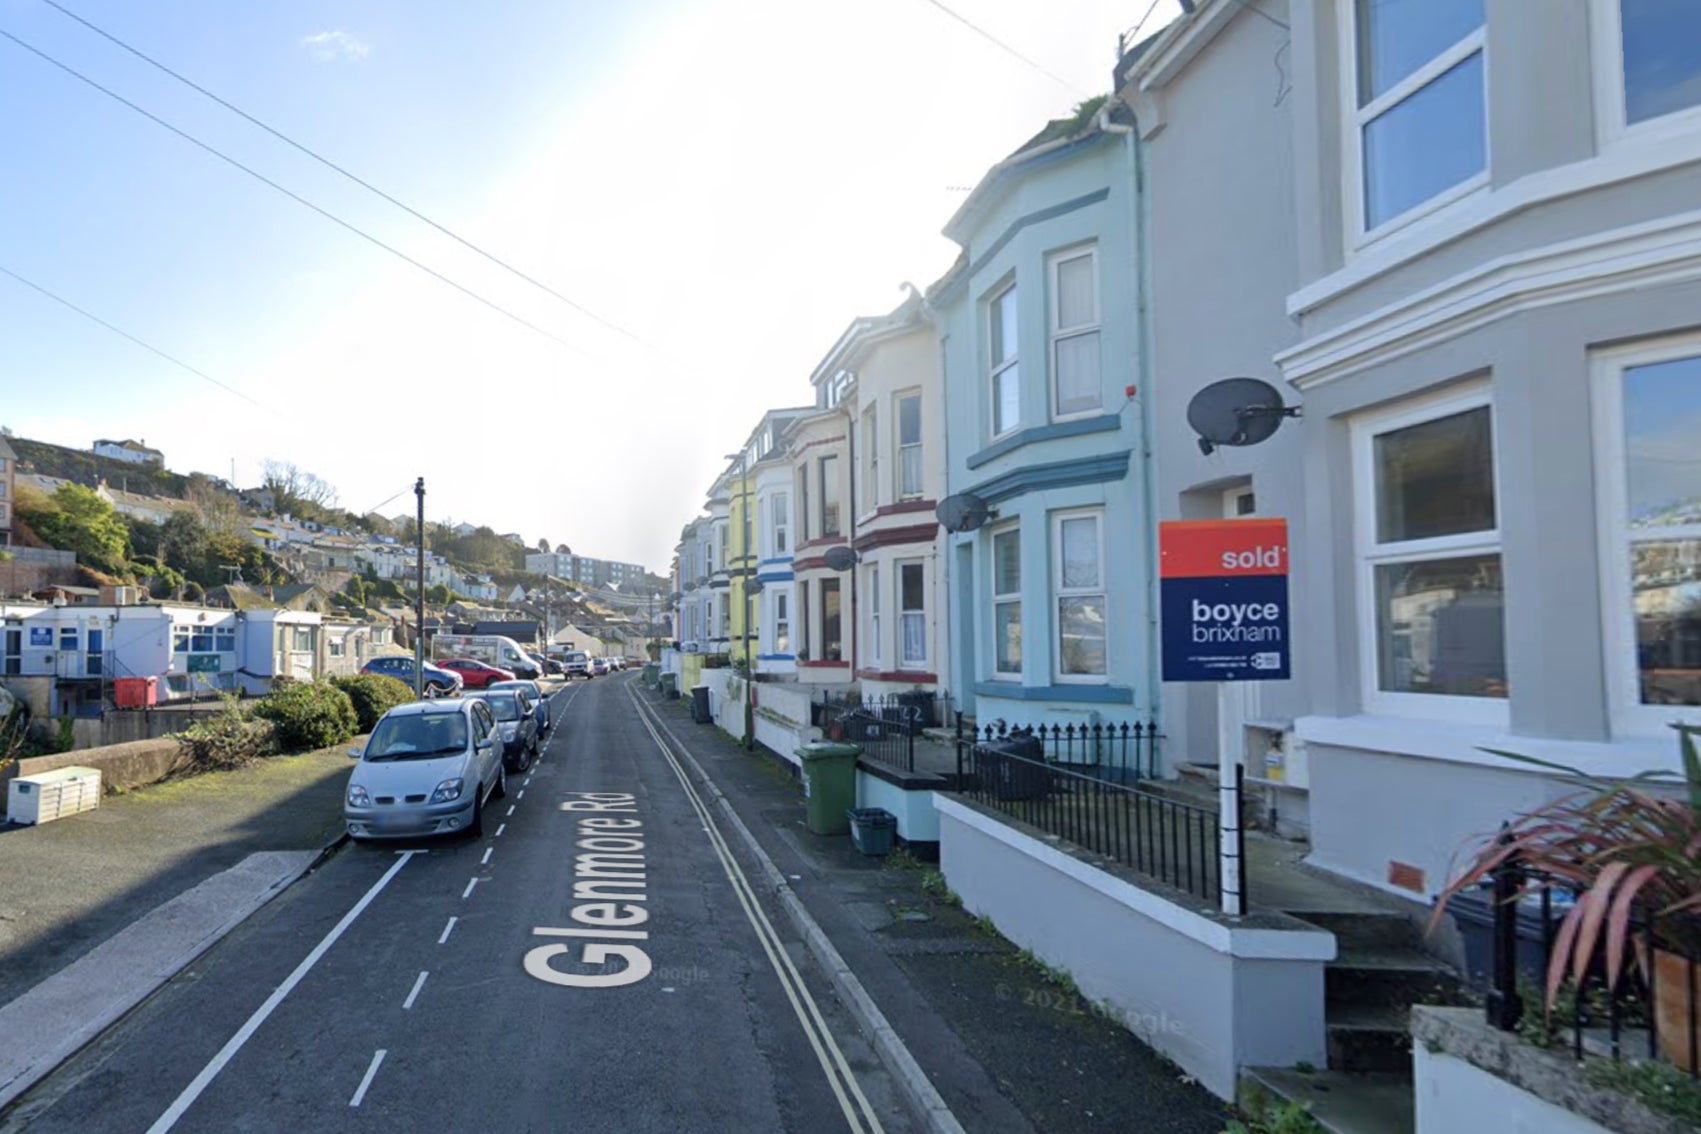 The boy was spotted in Glenmore Road, Brixham